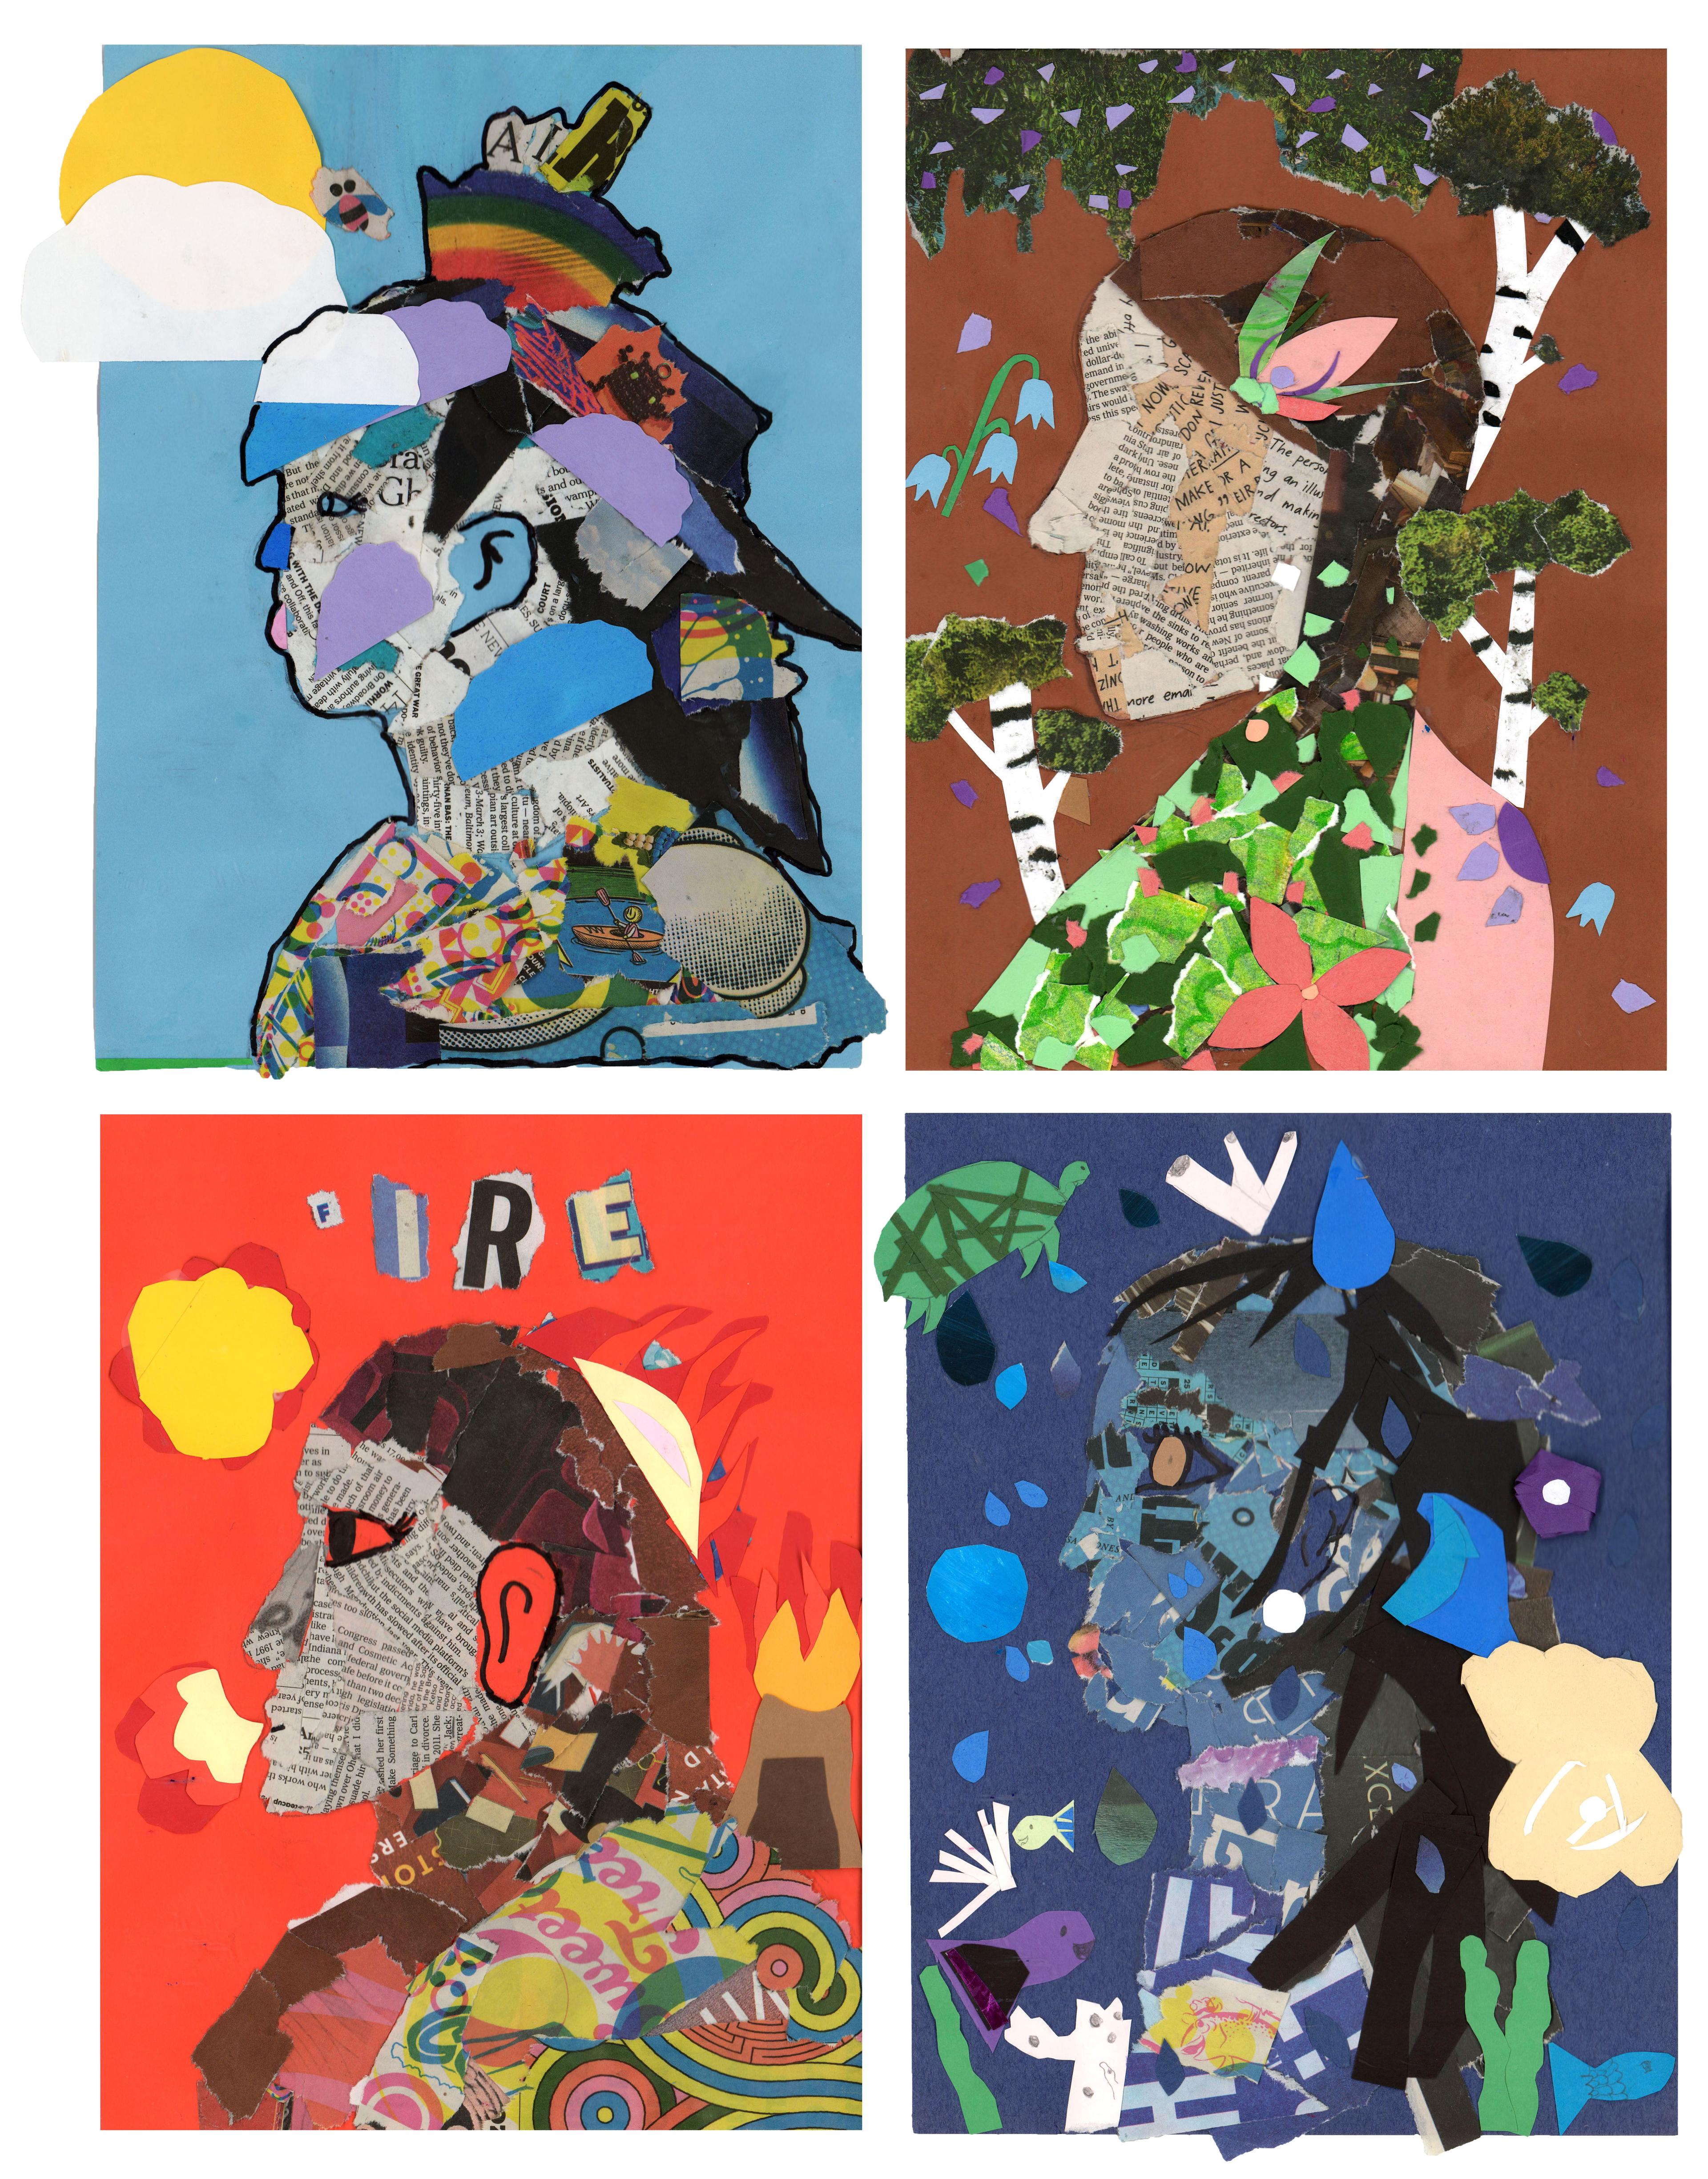 Collage of four rectangular, vertical portraits arranged in two rows, each representing one of four elements, clockwise from top left as air, earth, water, and fire. The face in each portrait faces left in profile and is collaged with paint, paper, and text.. The air portrait has a light blue background with a yellow sun peeking from behind a white cloud at top left. AIR is spelled above a rainbow on the top of the figure's head. The earth portrait has a brown background, surrounded by green trees with white trunks. The water portrait has a dark blue background, with a swimming green turtle at top left and a purple fish at bottom left. The fire portrait has a red background with yellow flames at top left and bottom right. FIRE is spelled out using letters cut out from magazines.